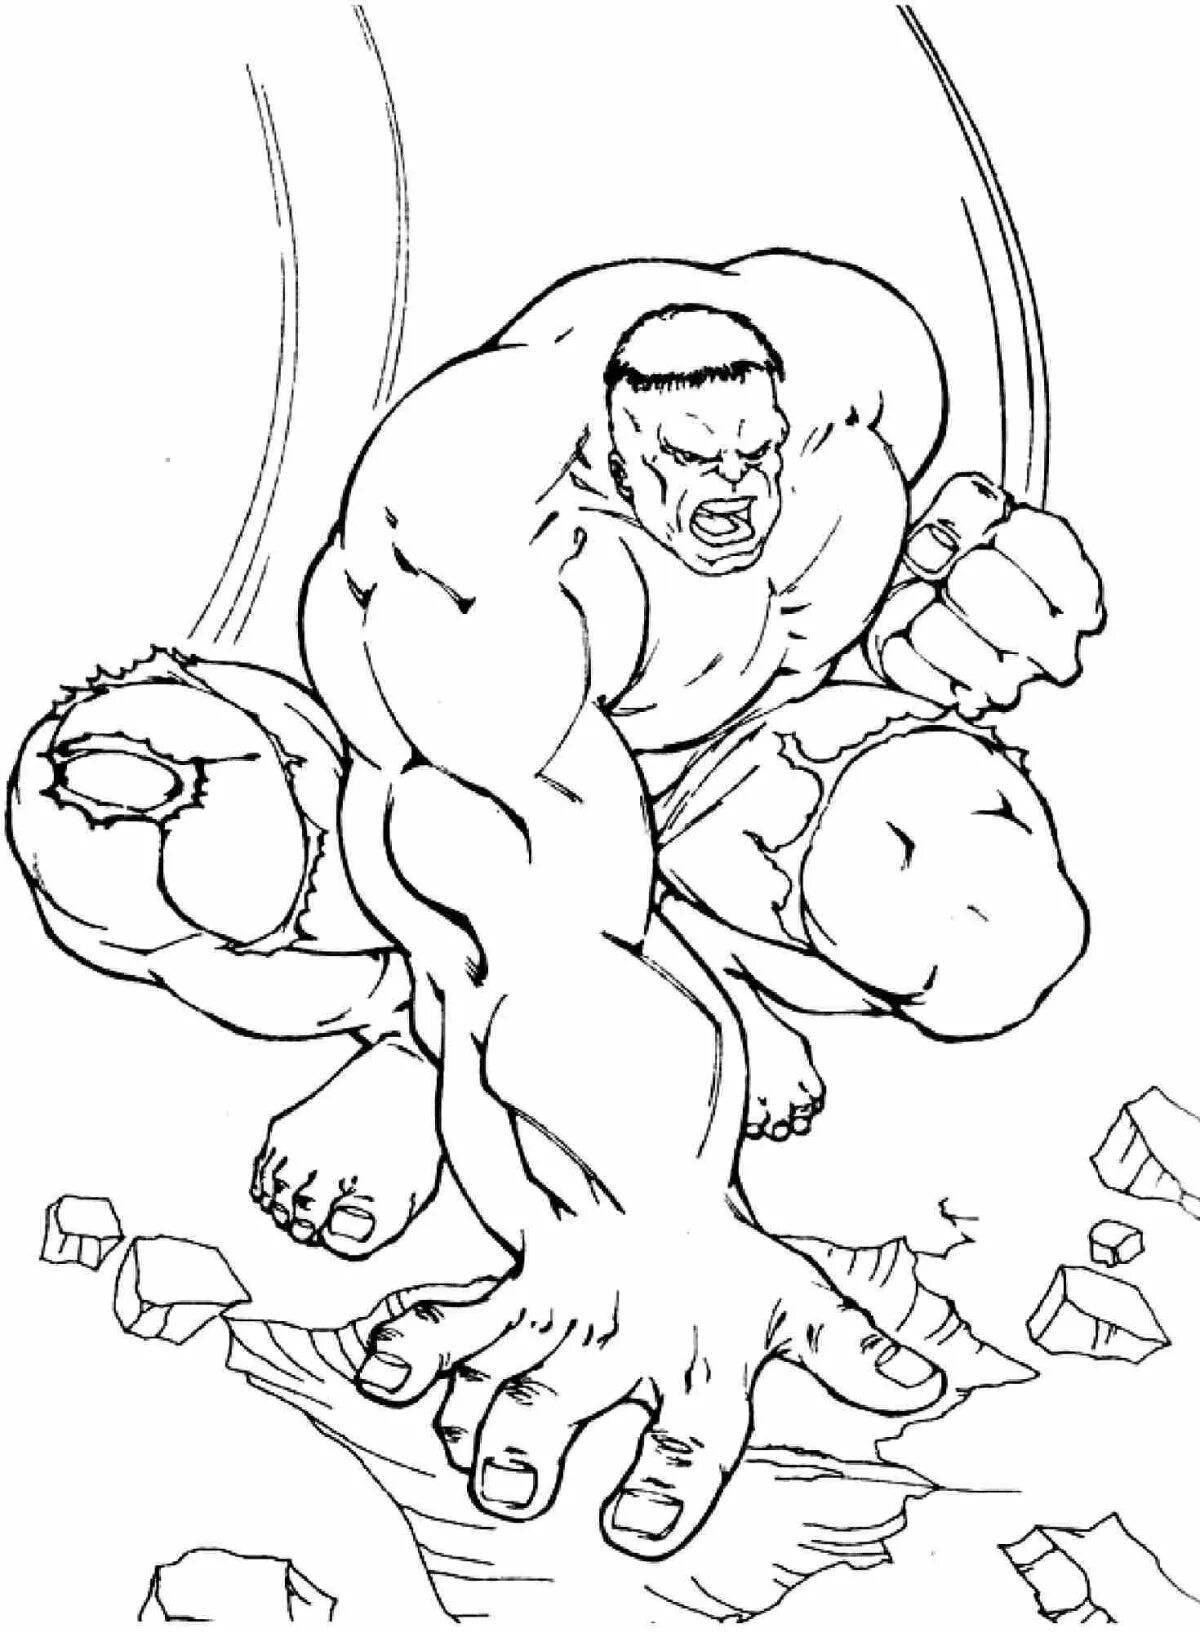 Great Hulk coloring book for 5-6 year olds